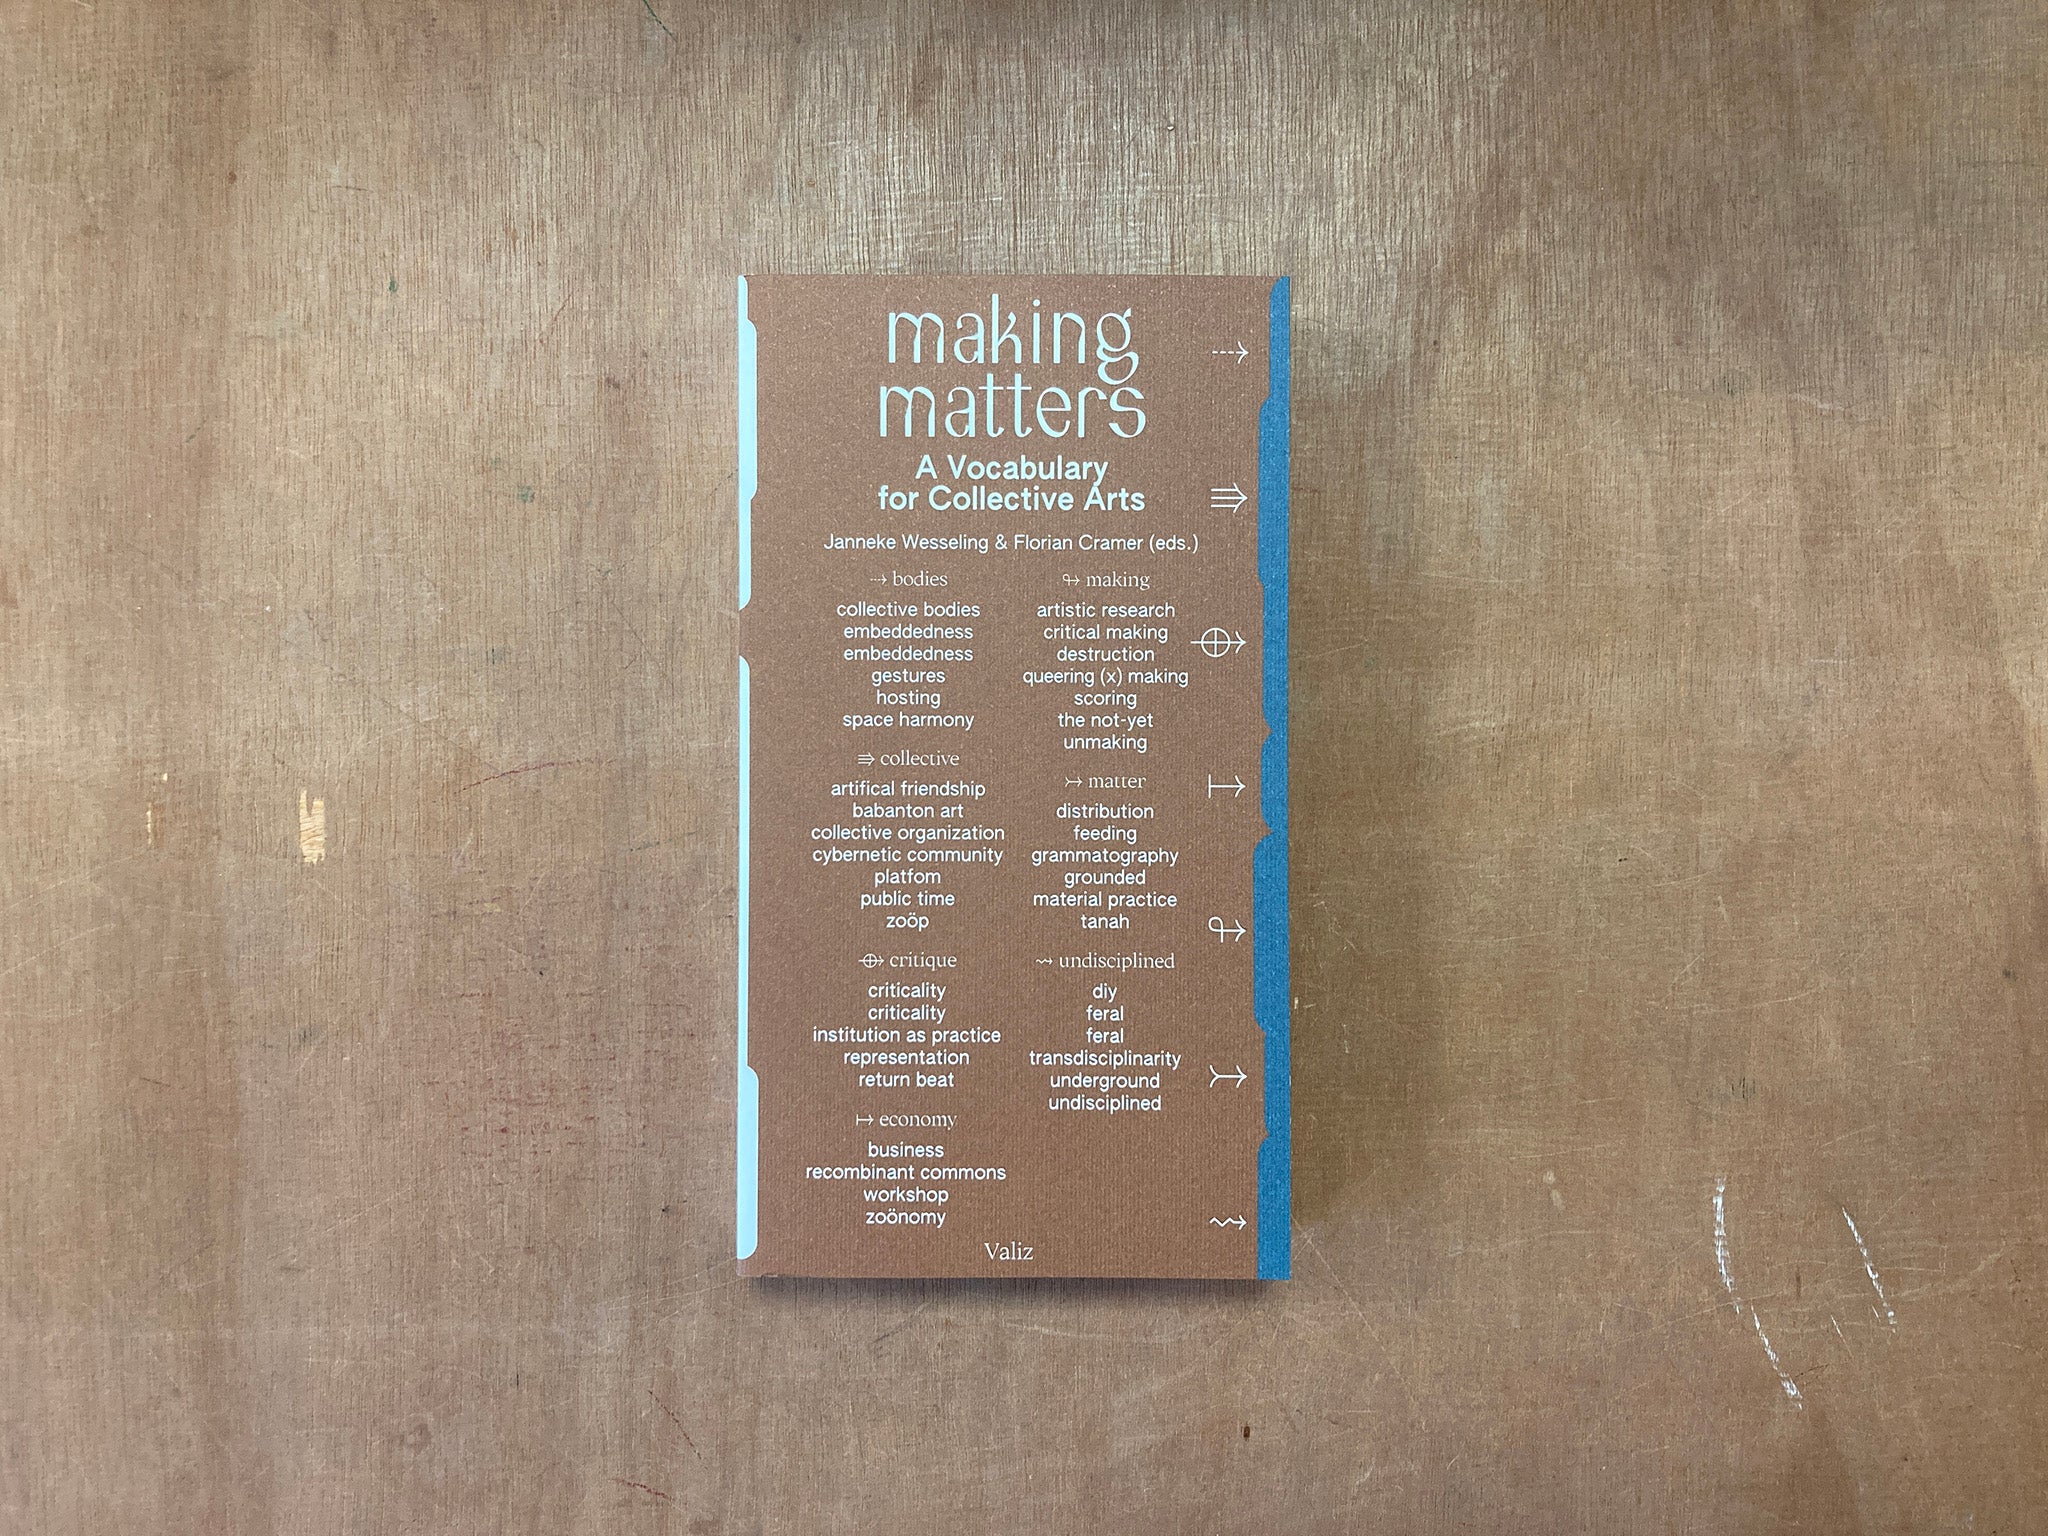 MAKING MATTERS: A VOCABULARY FOR COLLECTIVE ARTS edited by Janneke Wesseling and Florian Cramer